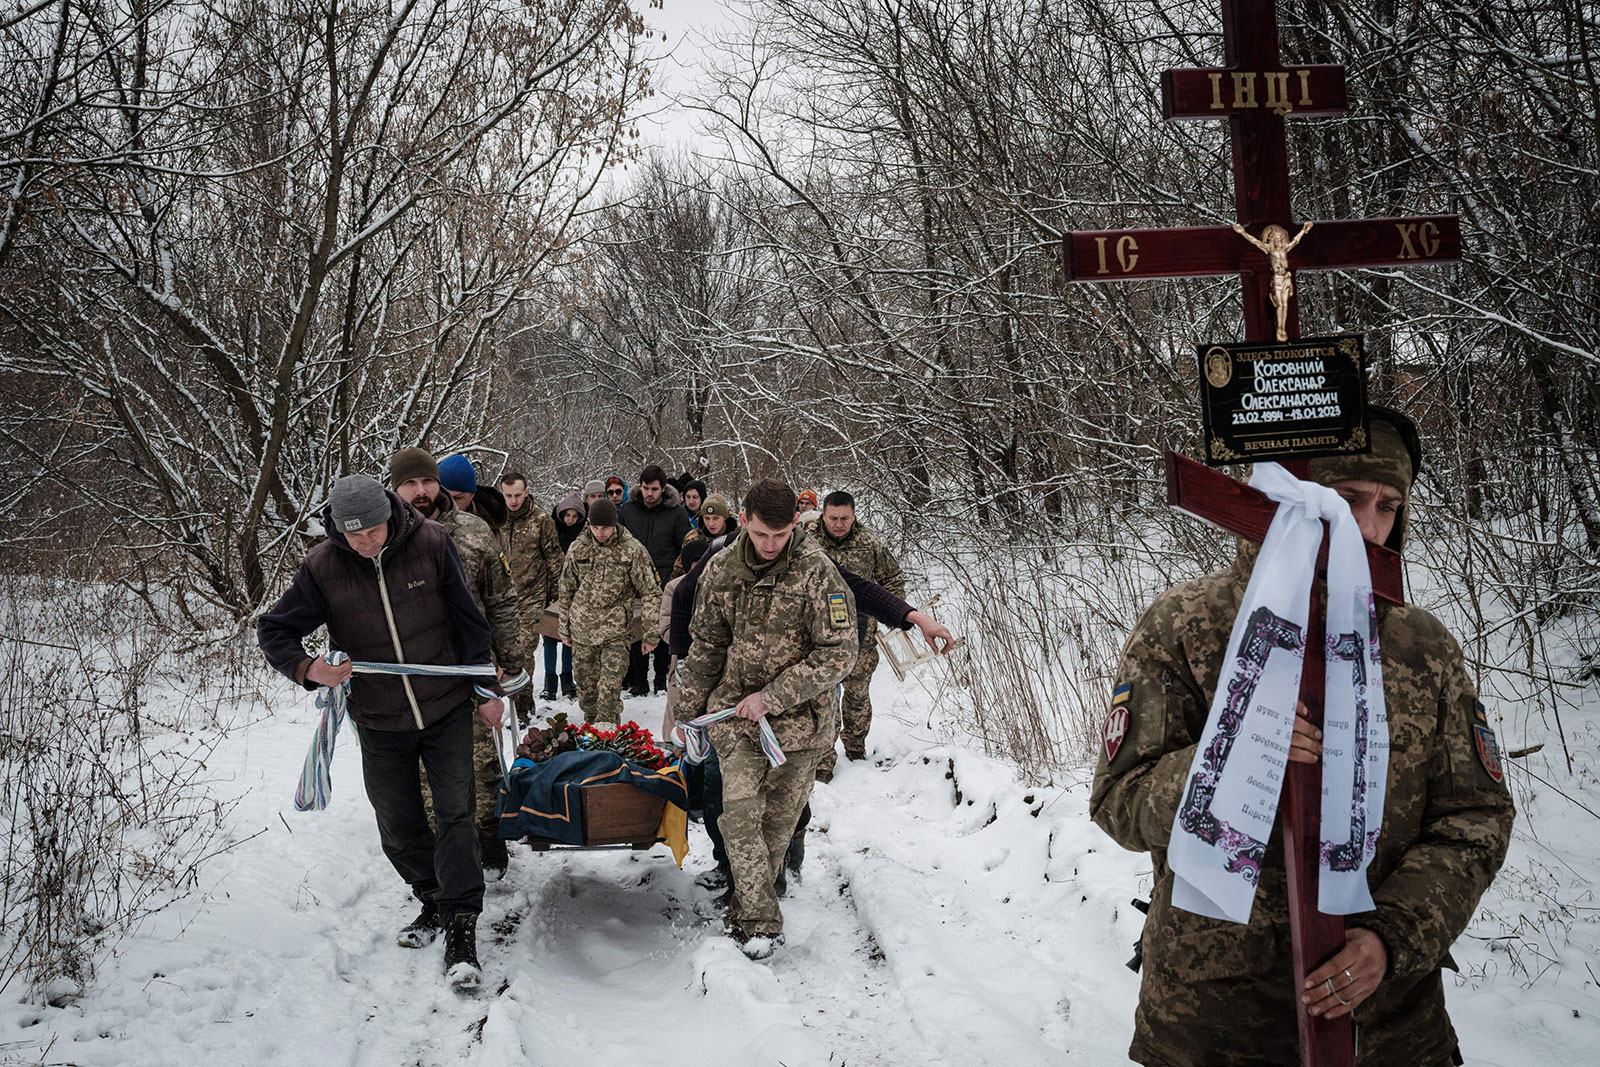 Oleksiy Storozh, right, 28, carries a cross to be placed at the grave of his late best friend, Ukrainian serviceman of the Azov Battalion Oleksandr Korovniy, 28, who was killed in action in Bakhmut, as friends carry Korovniy's coffin to a cemetery in Sloviansk on January 30. 